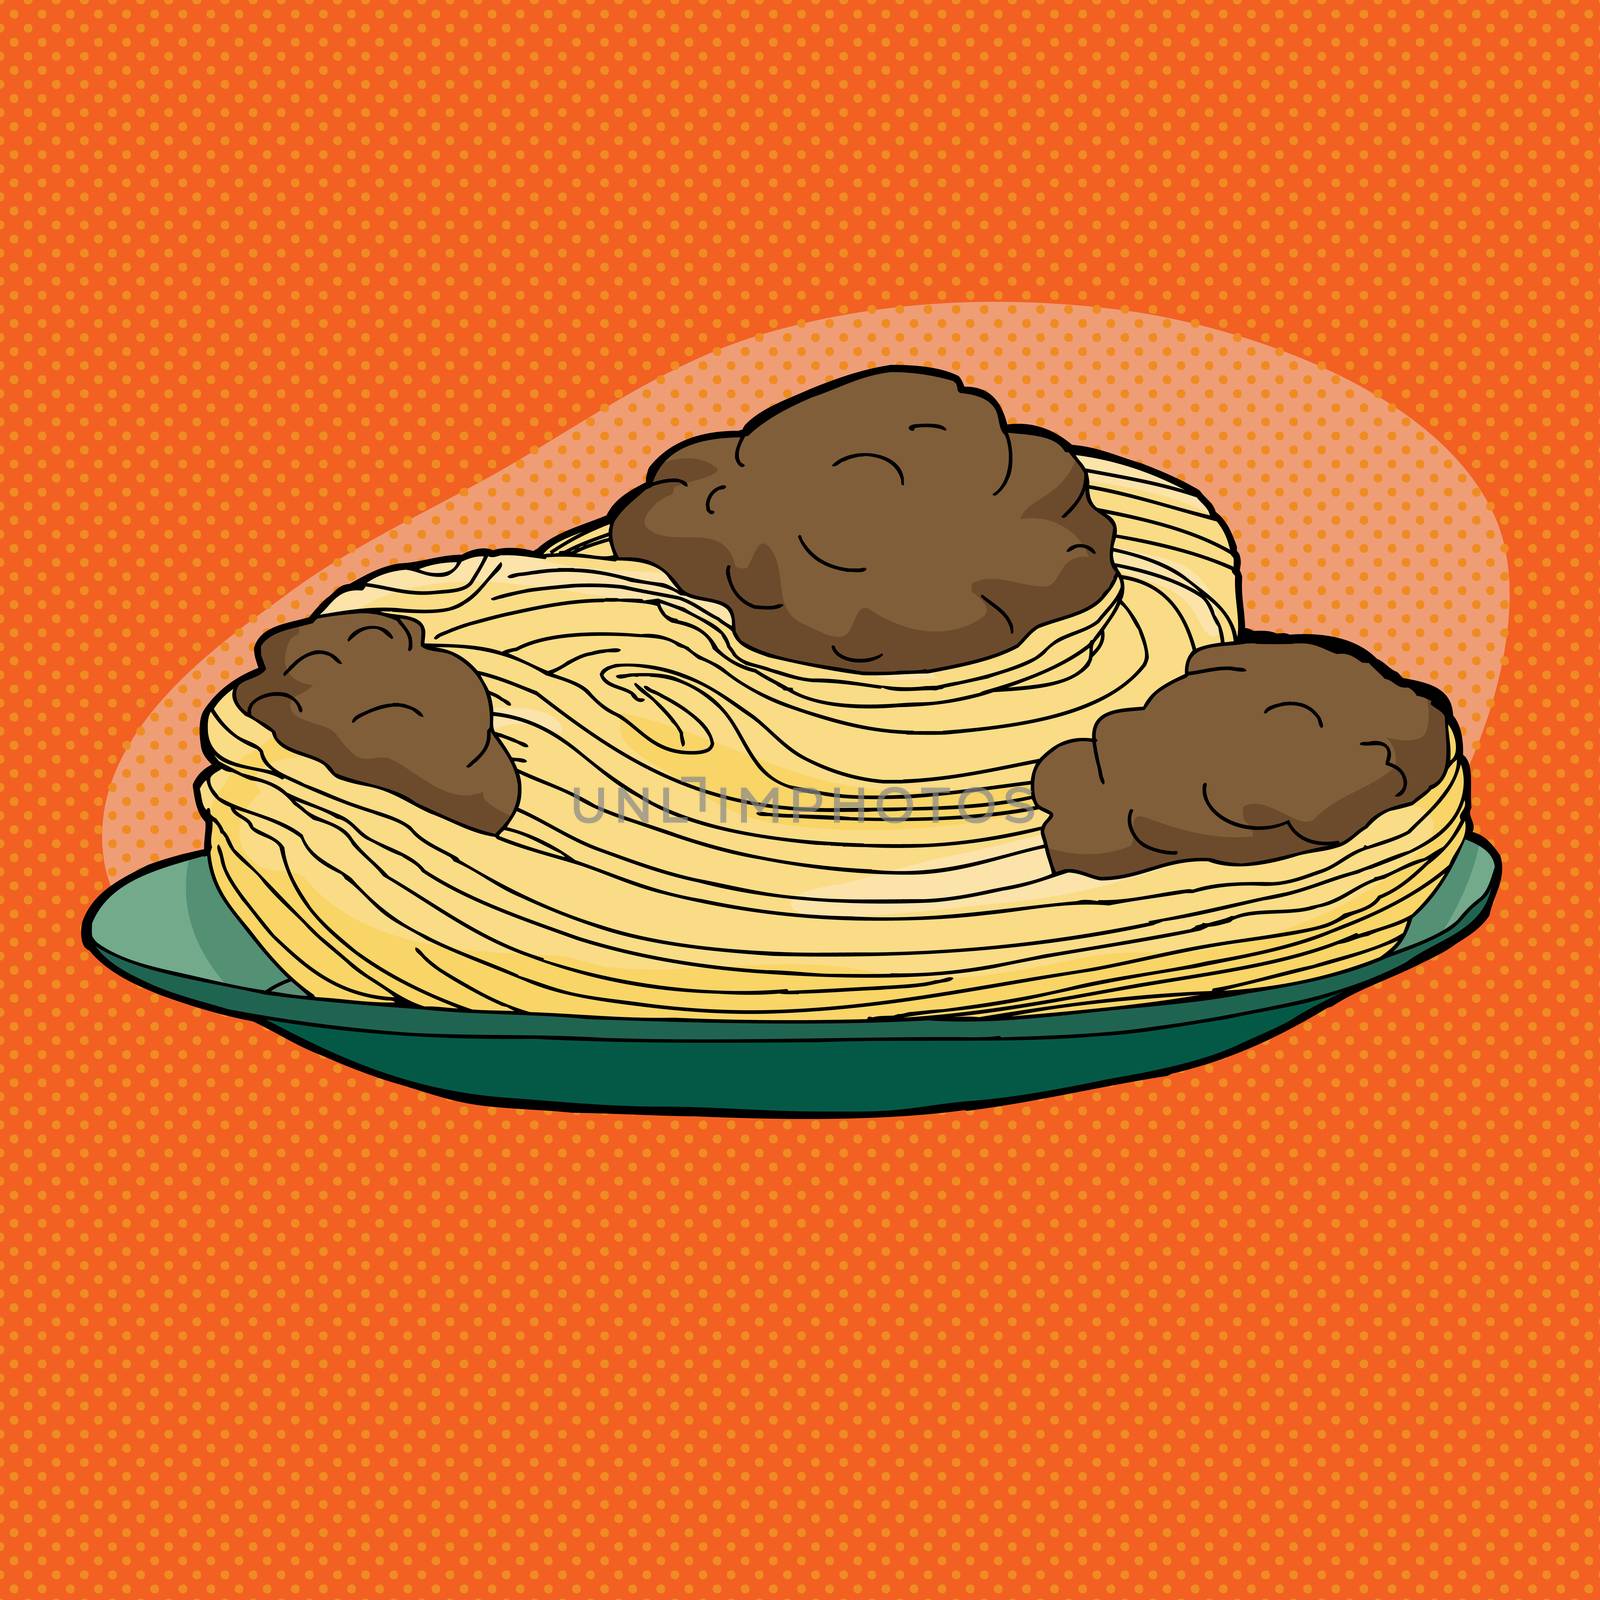 Meatball Plate Over Orange by TheBlackRhino